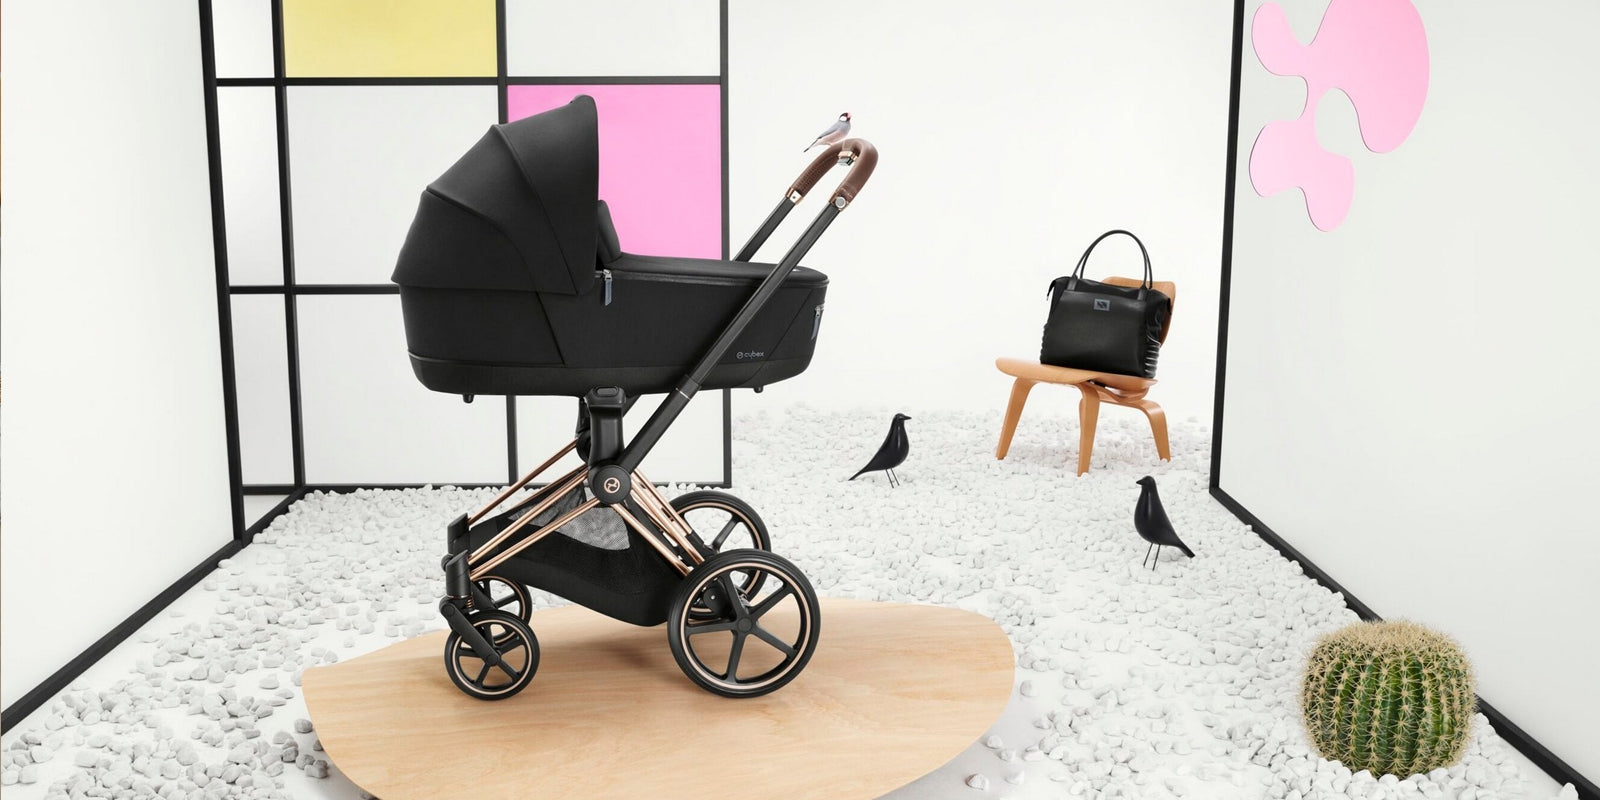 A CYBEX Priam stroller with carrycot, in a large room with decoration